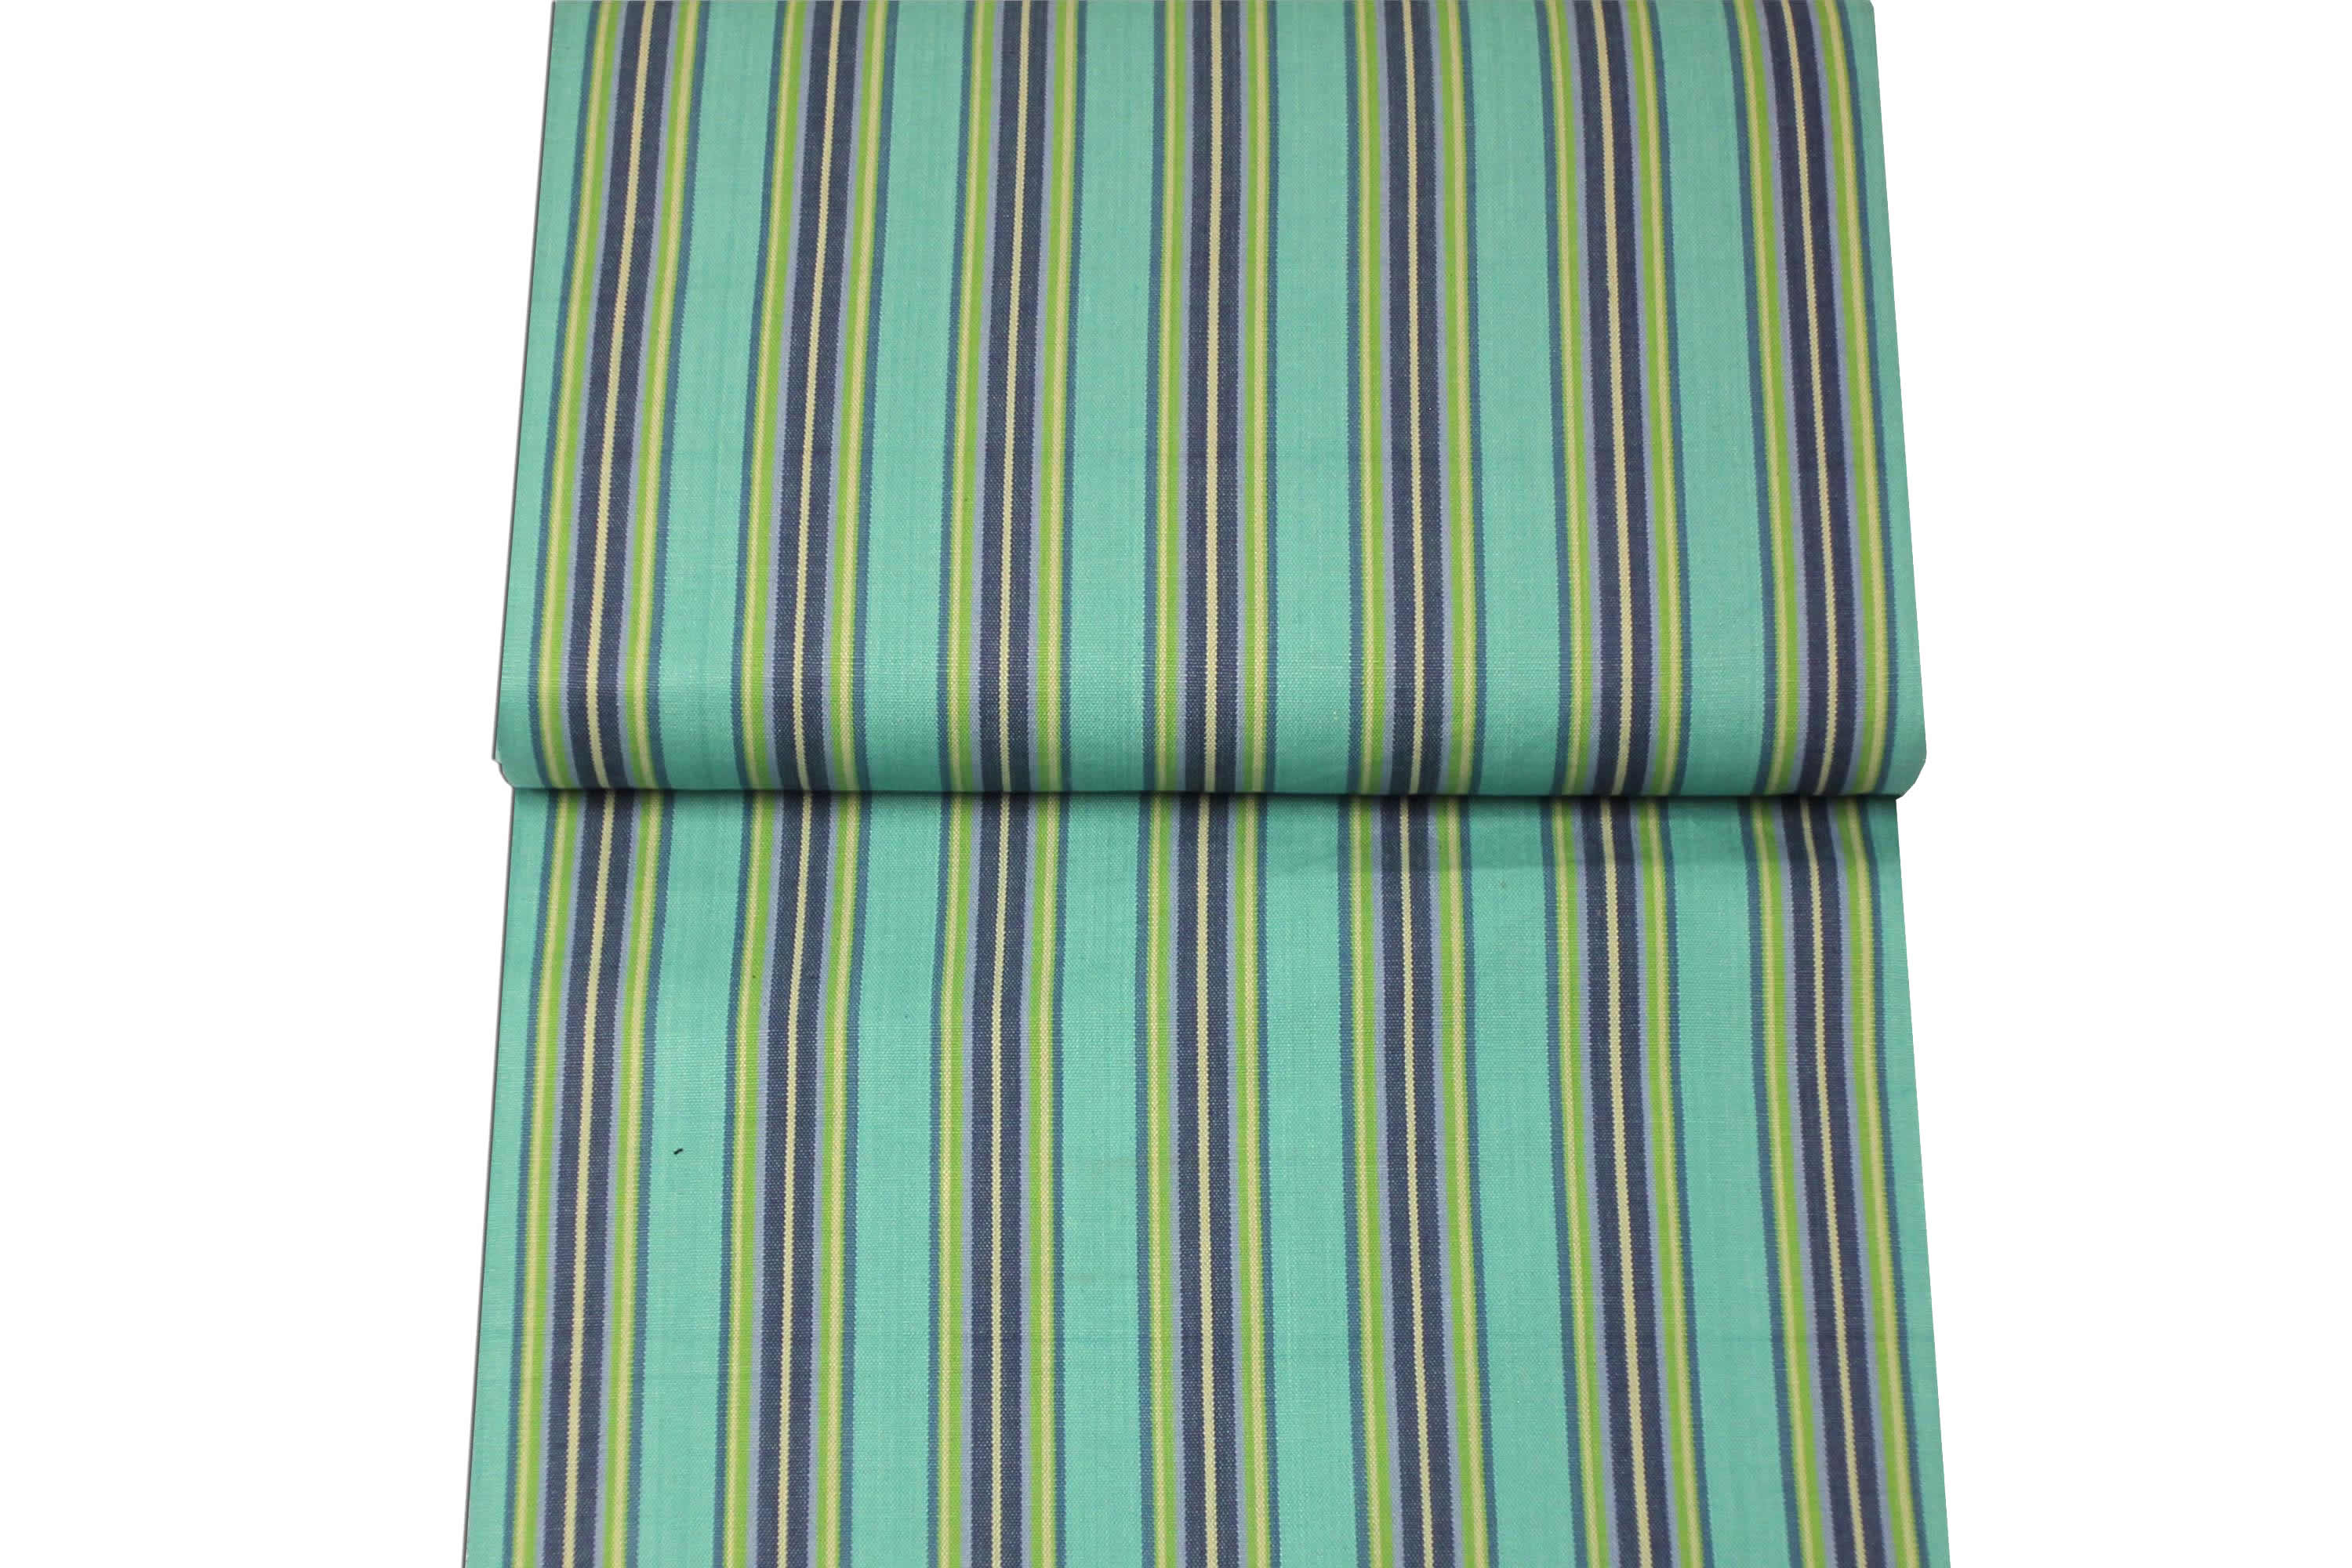 Replacement Directors Chair Covers -Turquoise, blue, green, cream stripes 